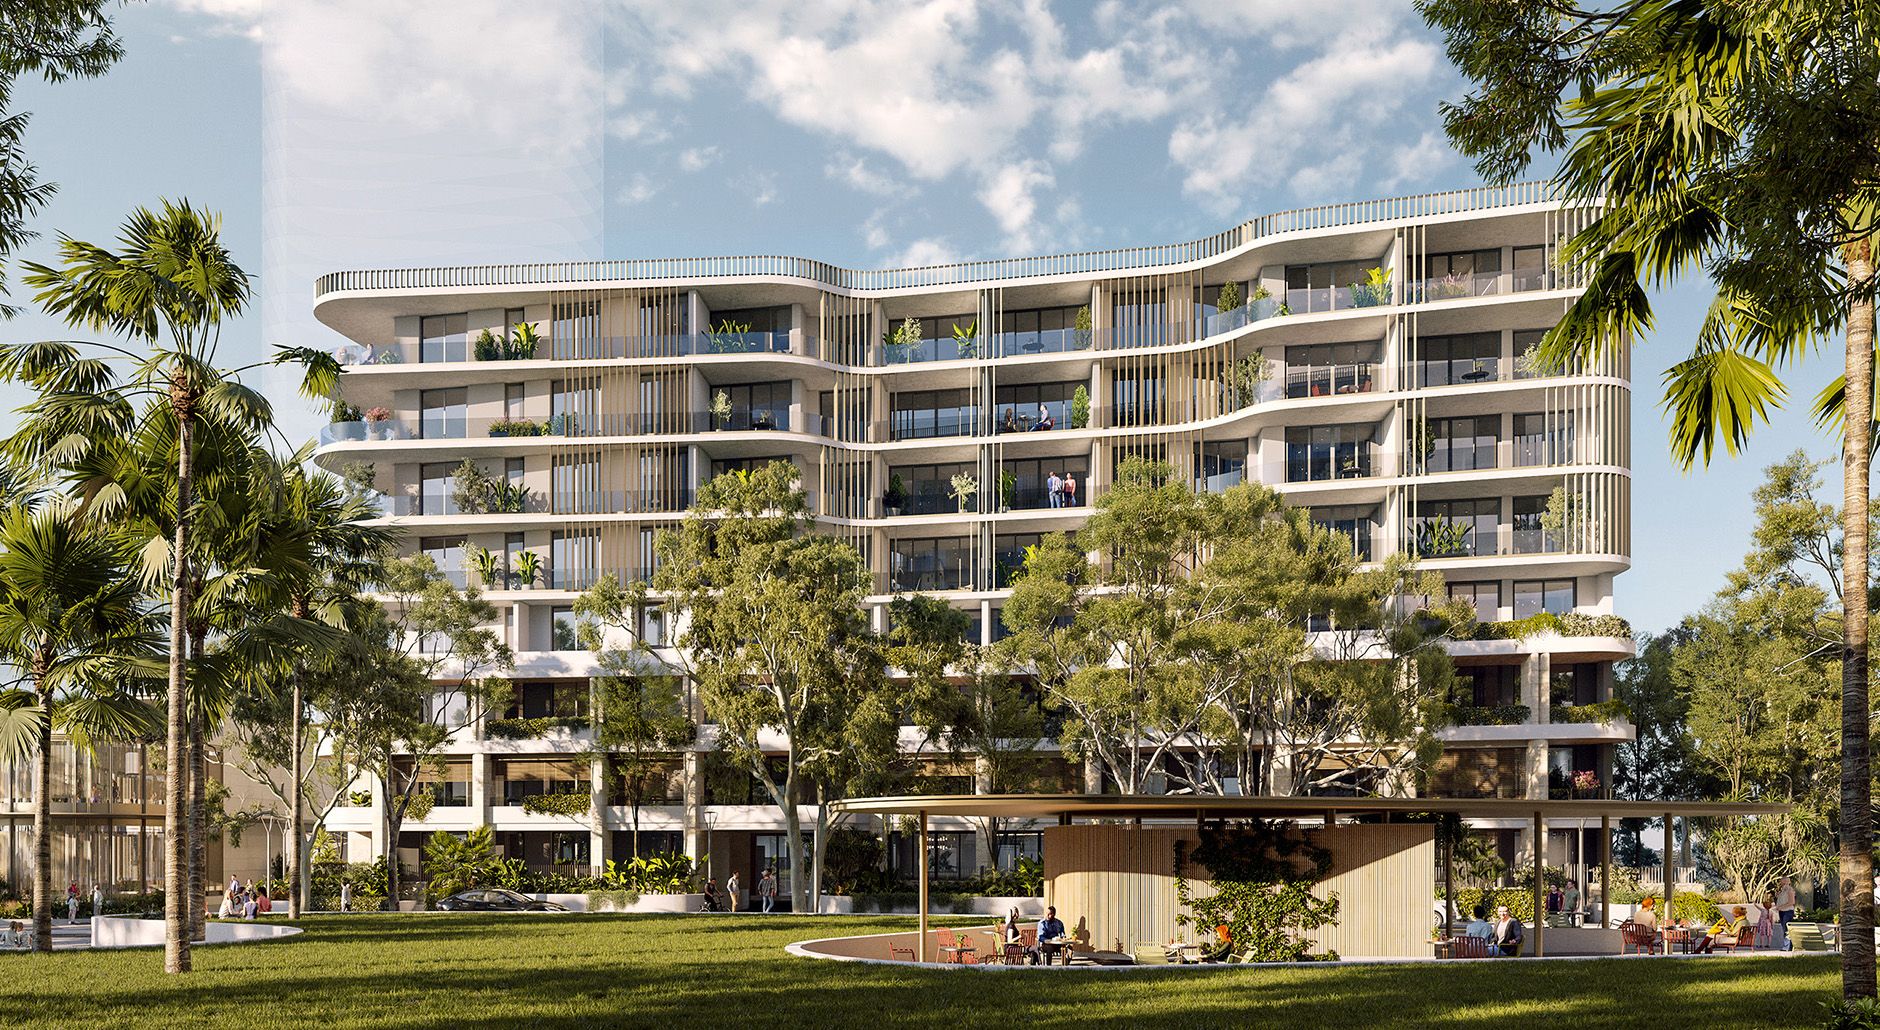 2 bedrooms New Apartments / Off the Plan in N206/3 Sea Rush Street SYDNEY OLYMPIC PARK NSW, 2127